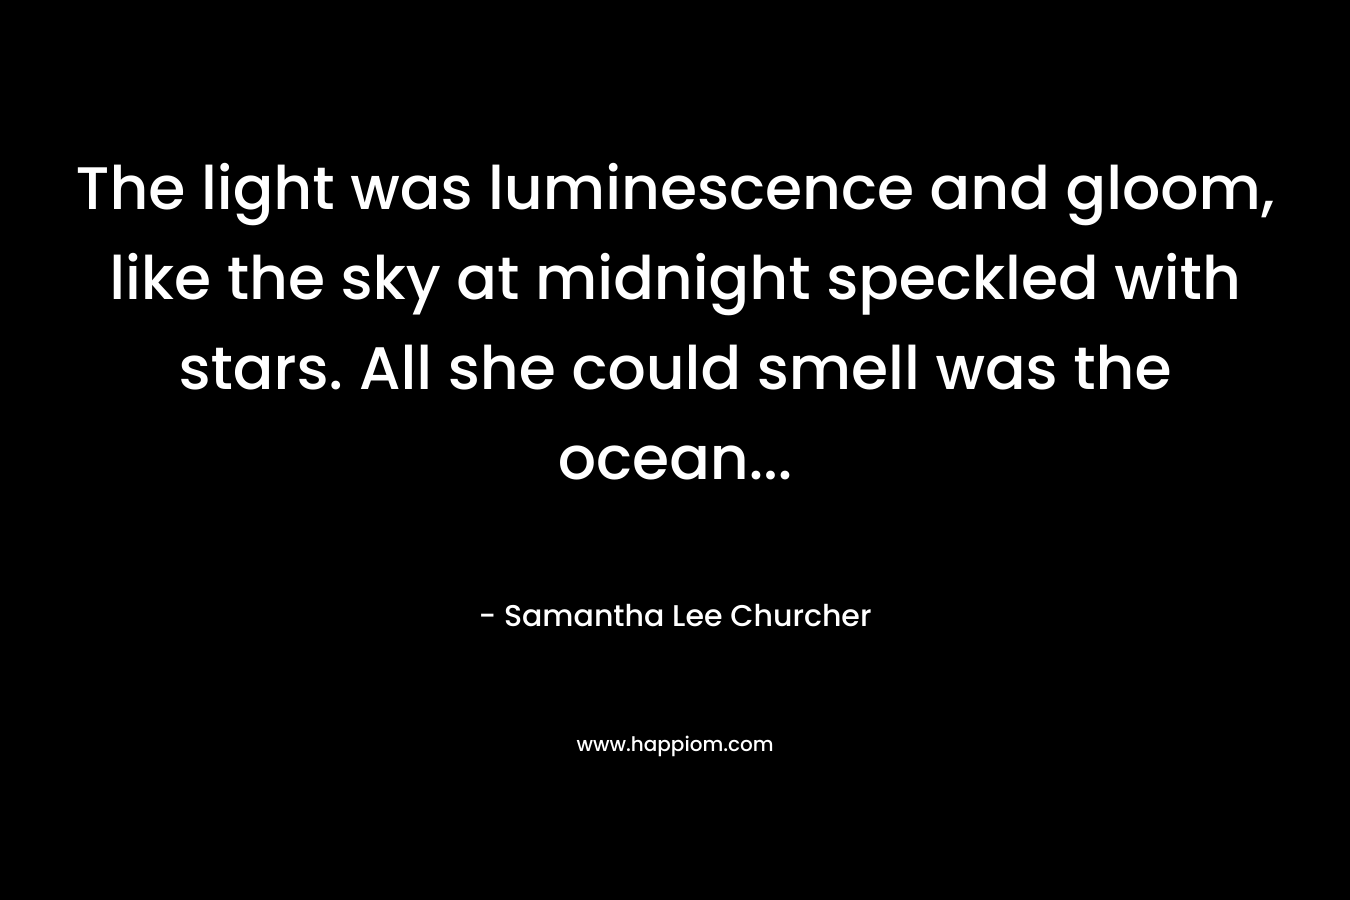 The light was luminescence and gloom, like the sky at midnight speckled with stars. All she could smell was the ocean… – Samantha Lee Churcher